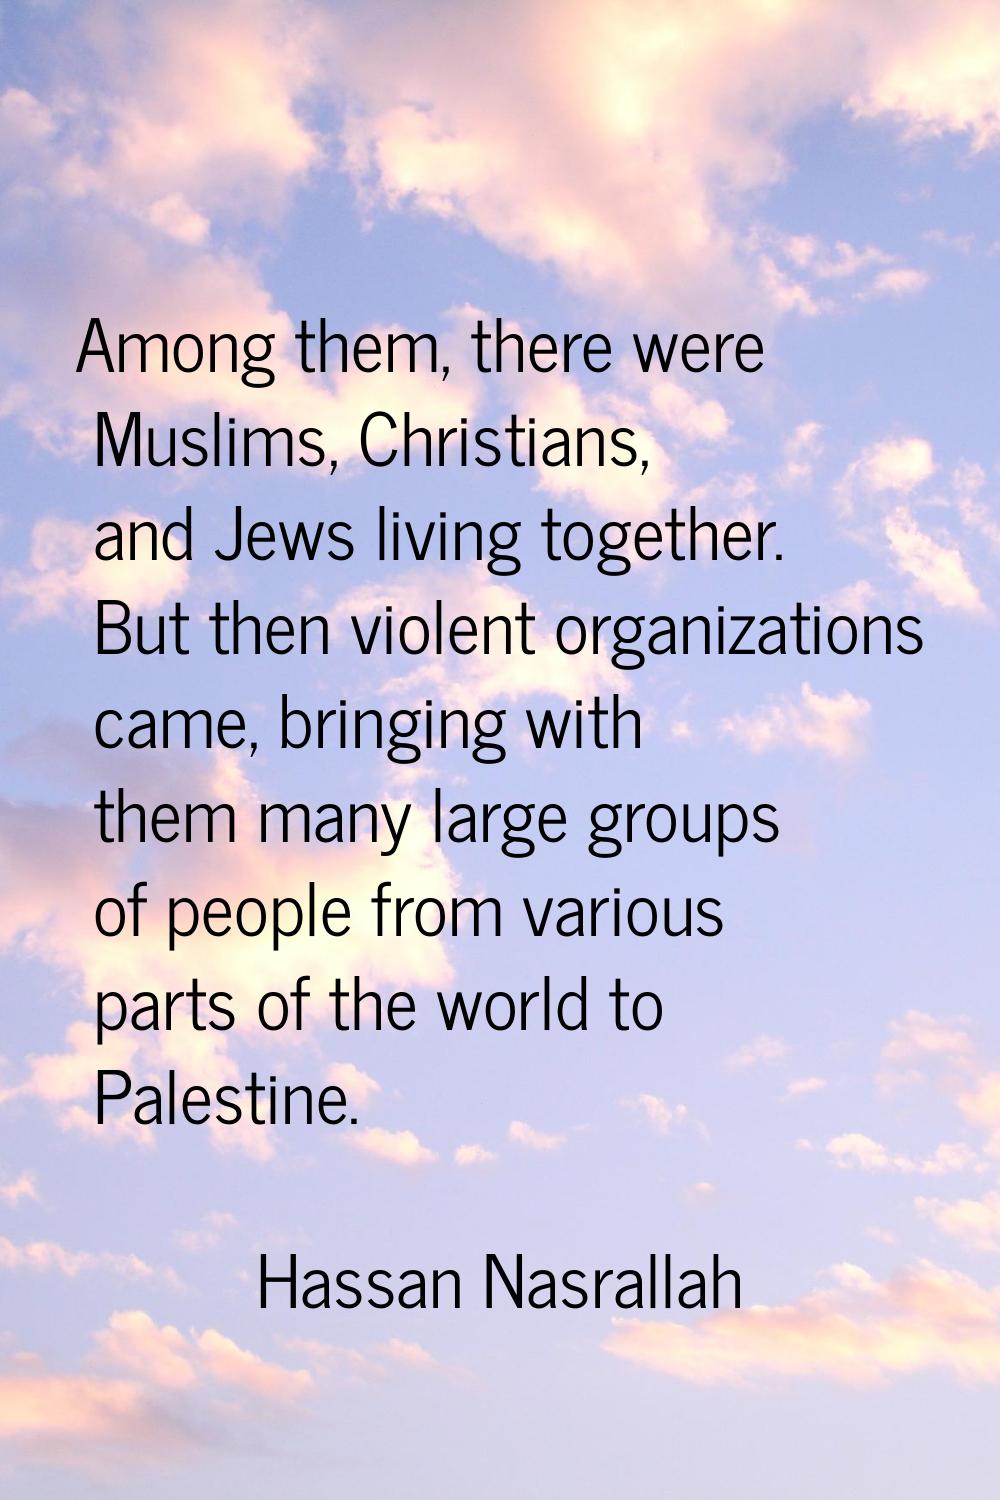 Among them, there were Muslims, Christians, and Jews living together. But then violent organization